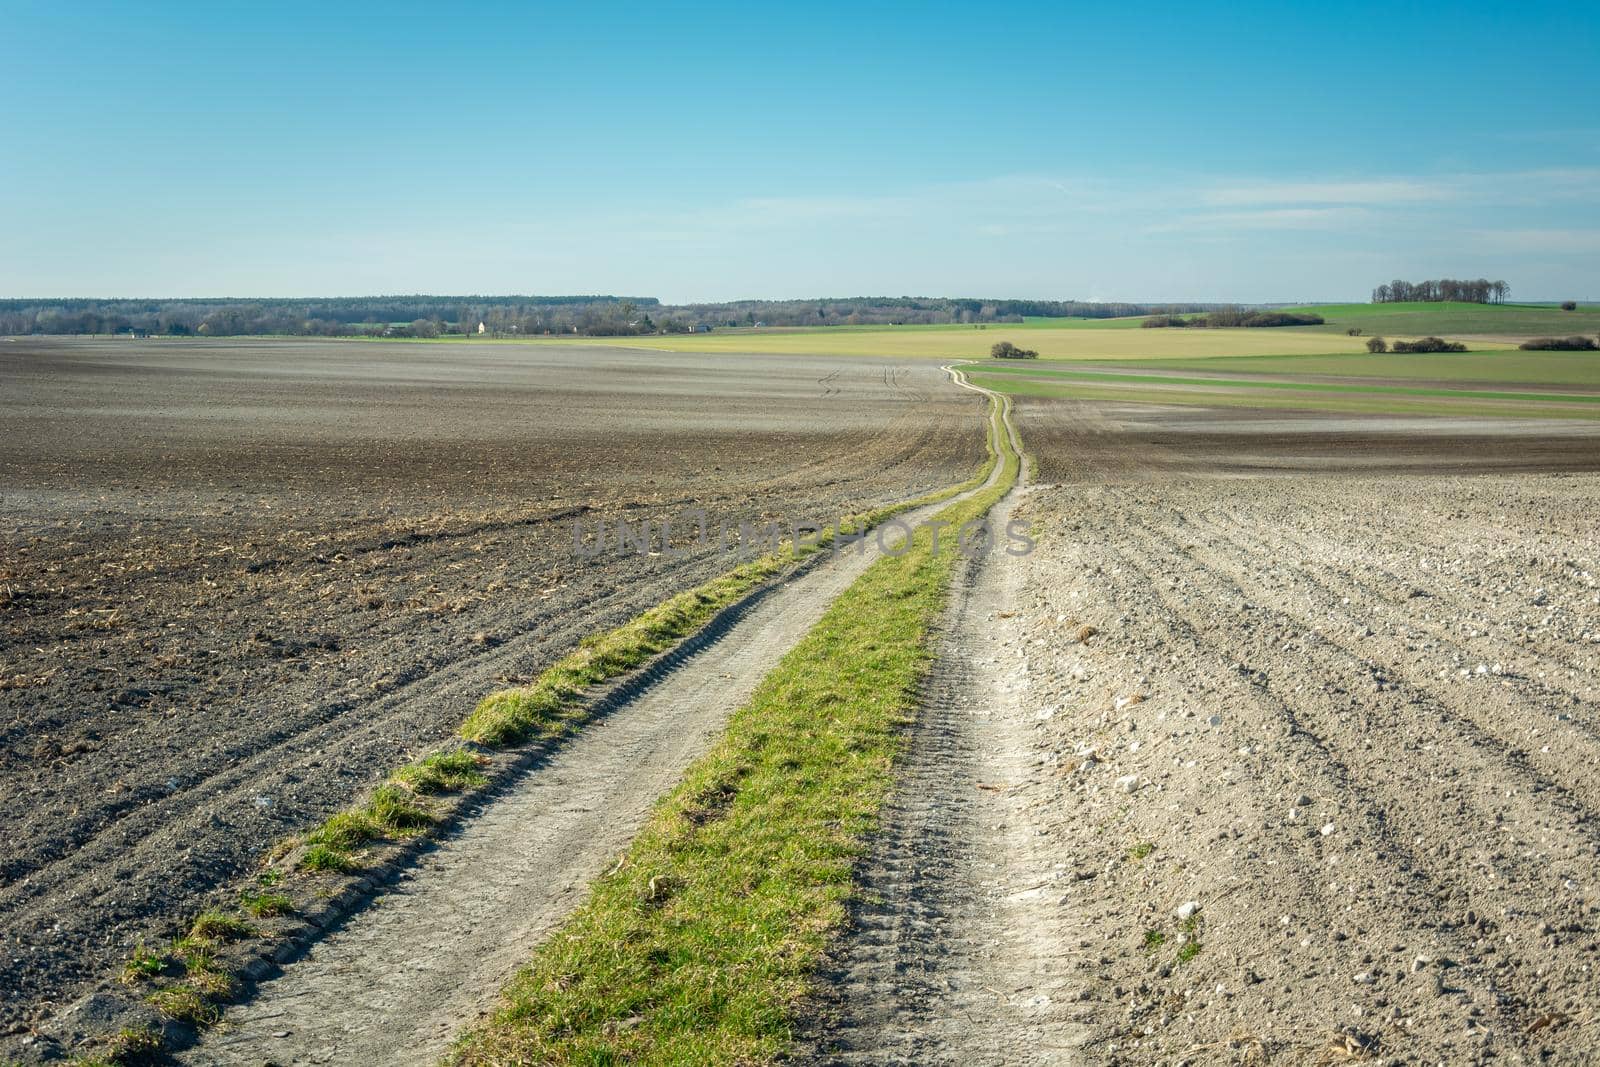 A long dirt road through a plowed field, Staw, Lubelskie, Poland